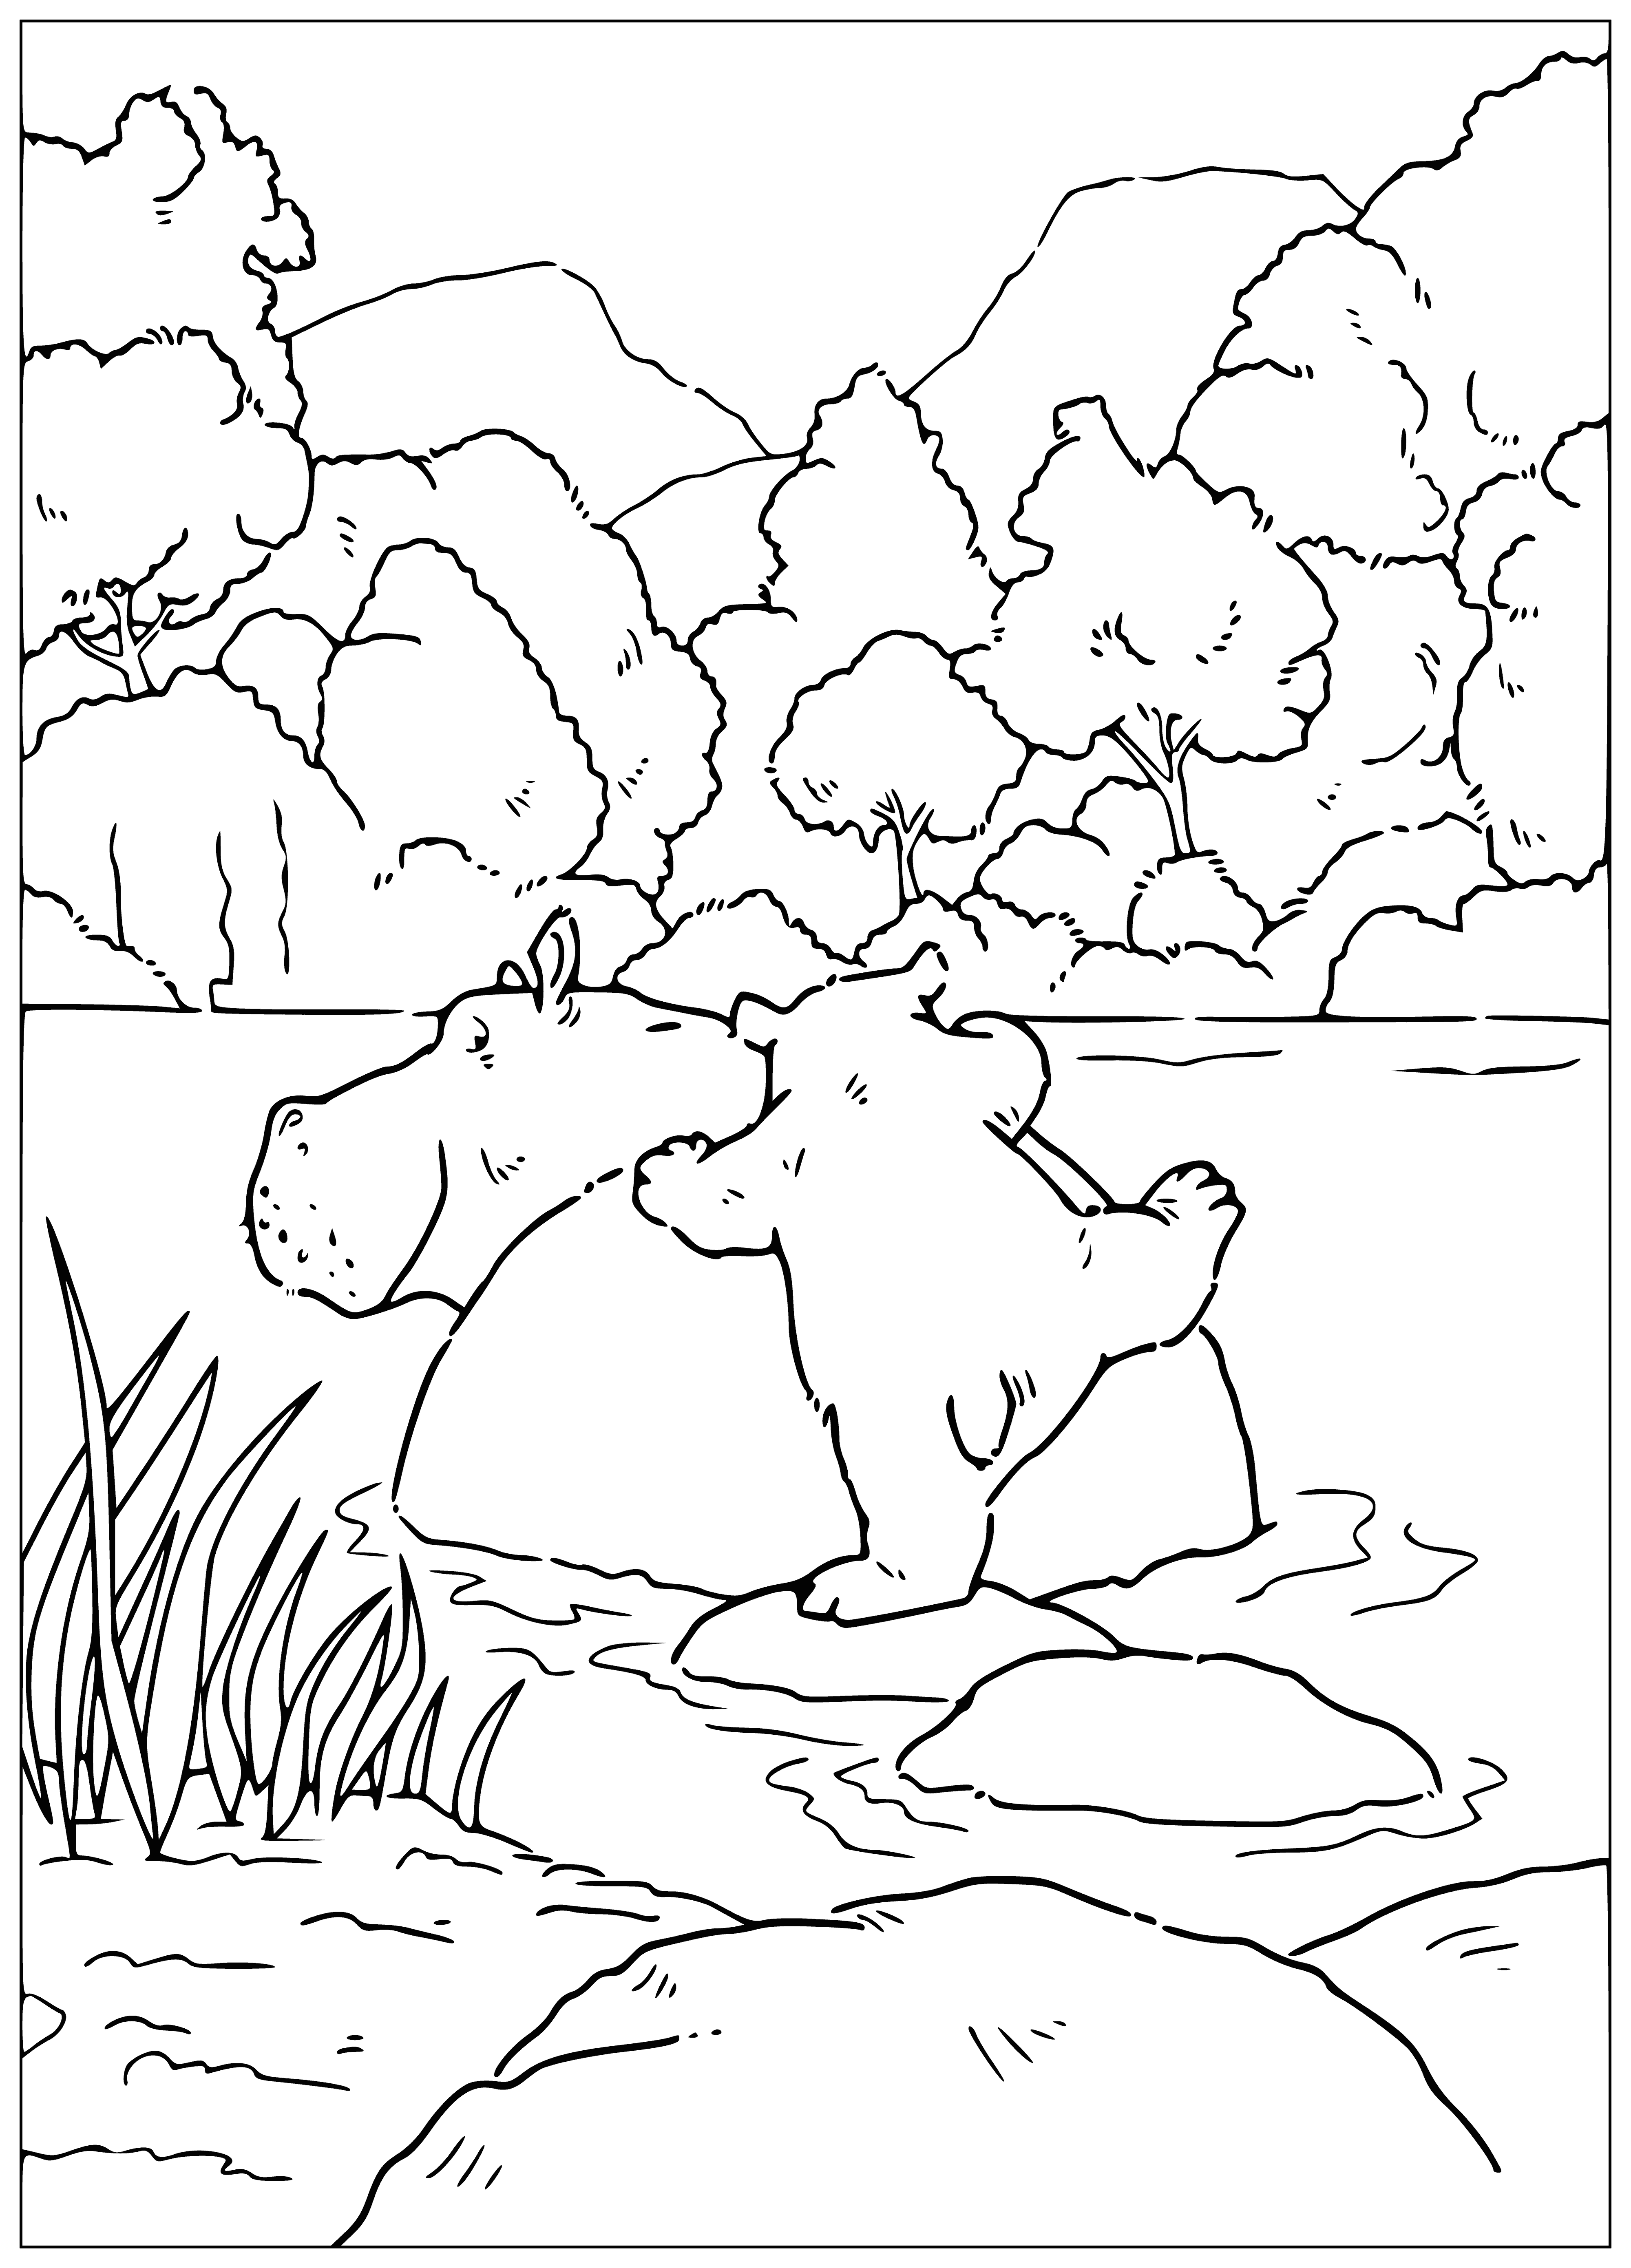 Teddy bear Lars coloring page